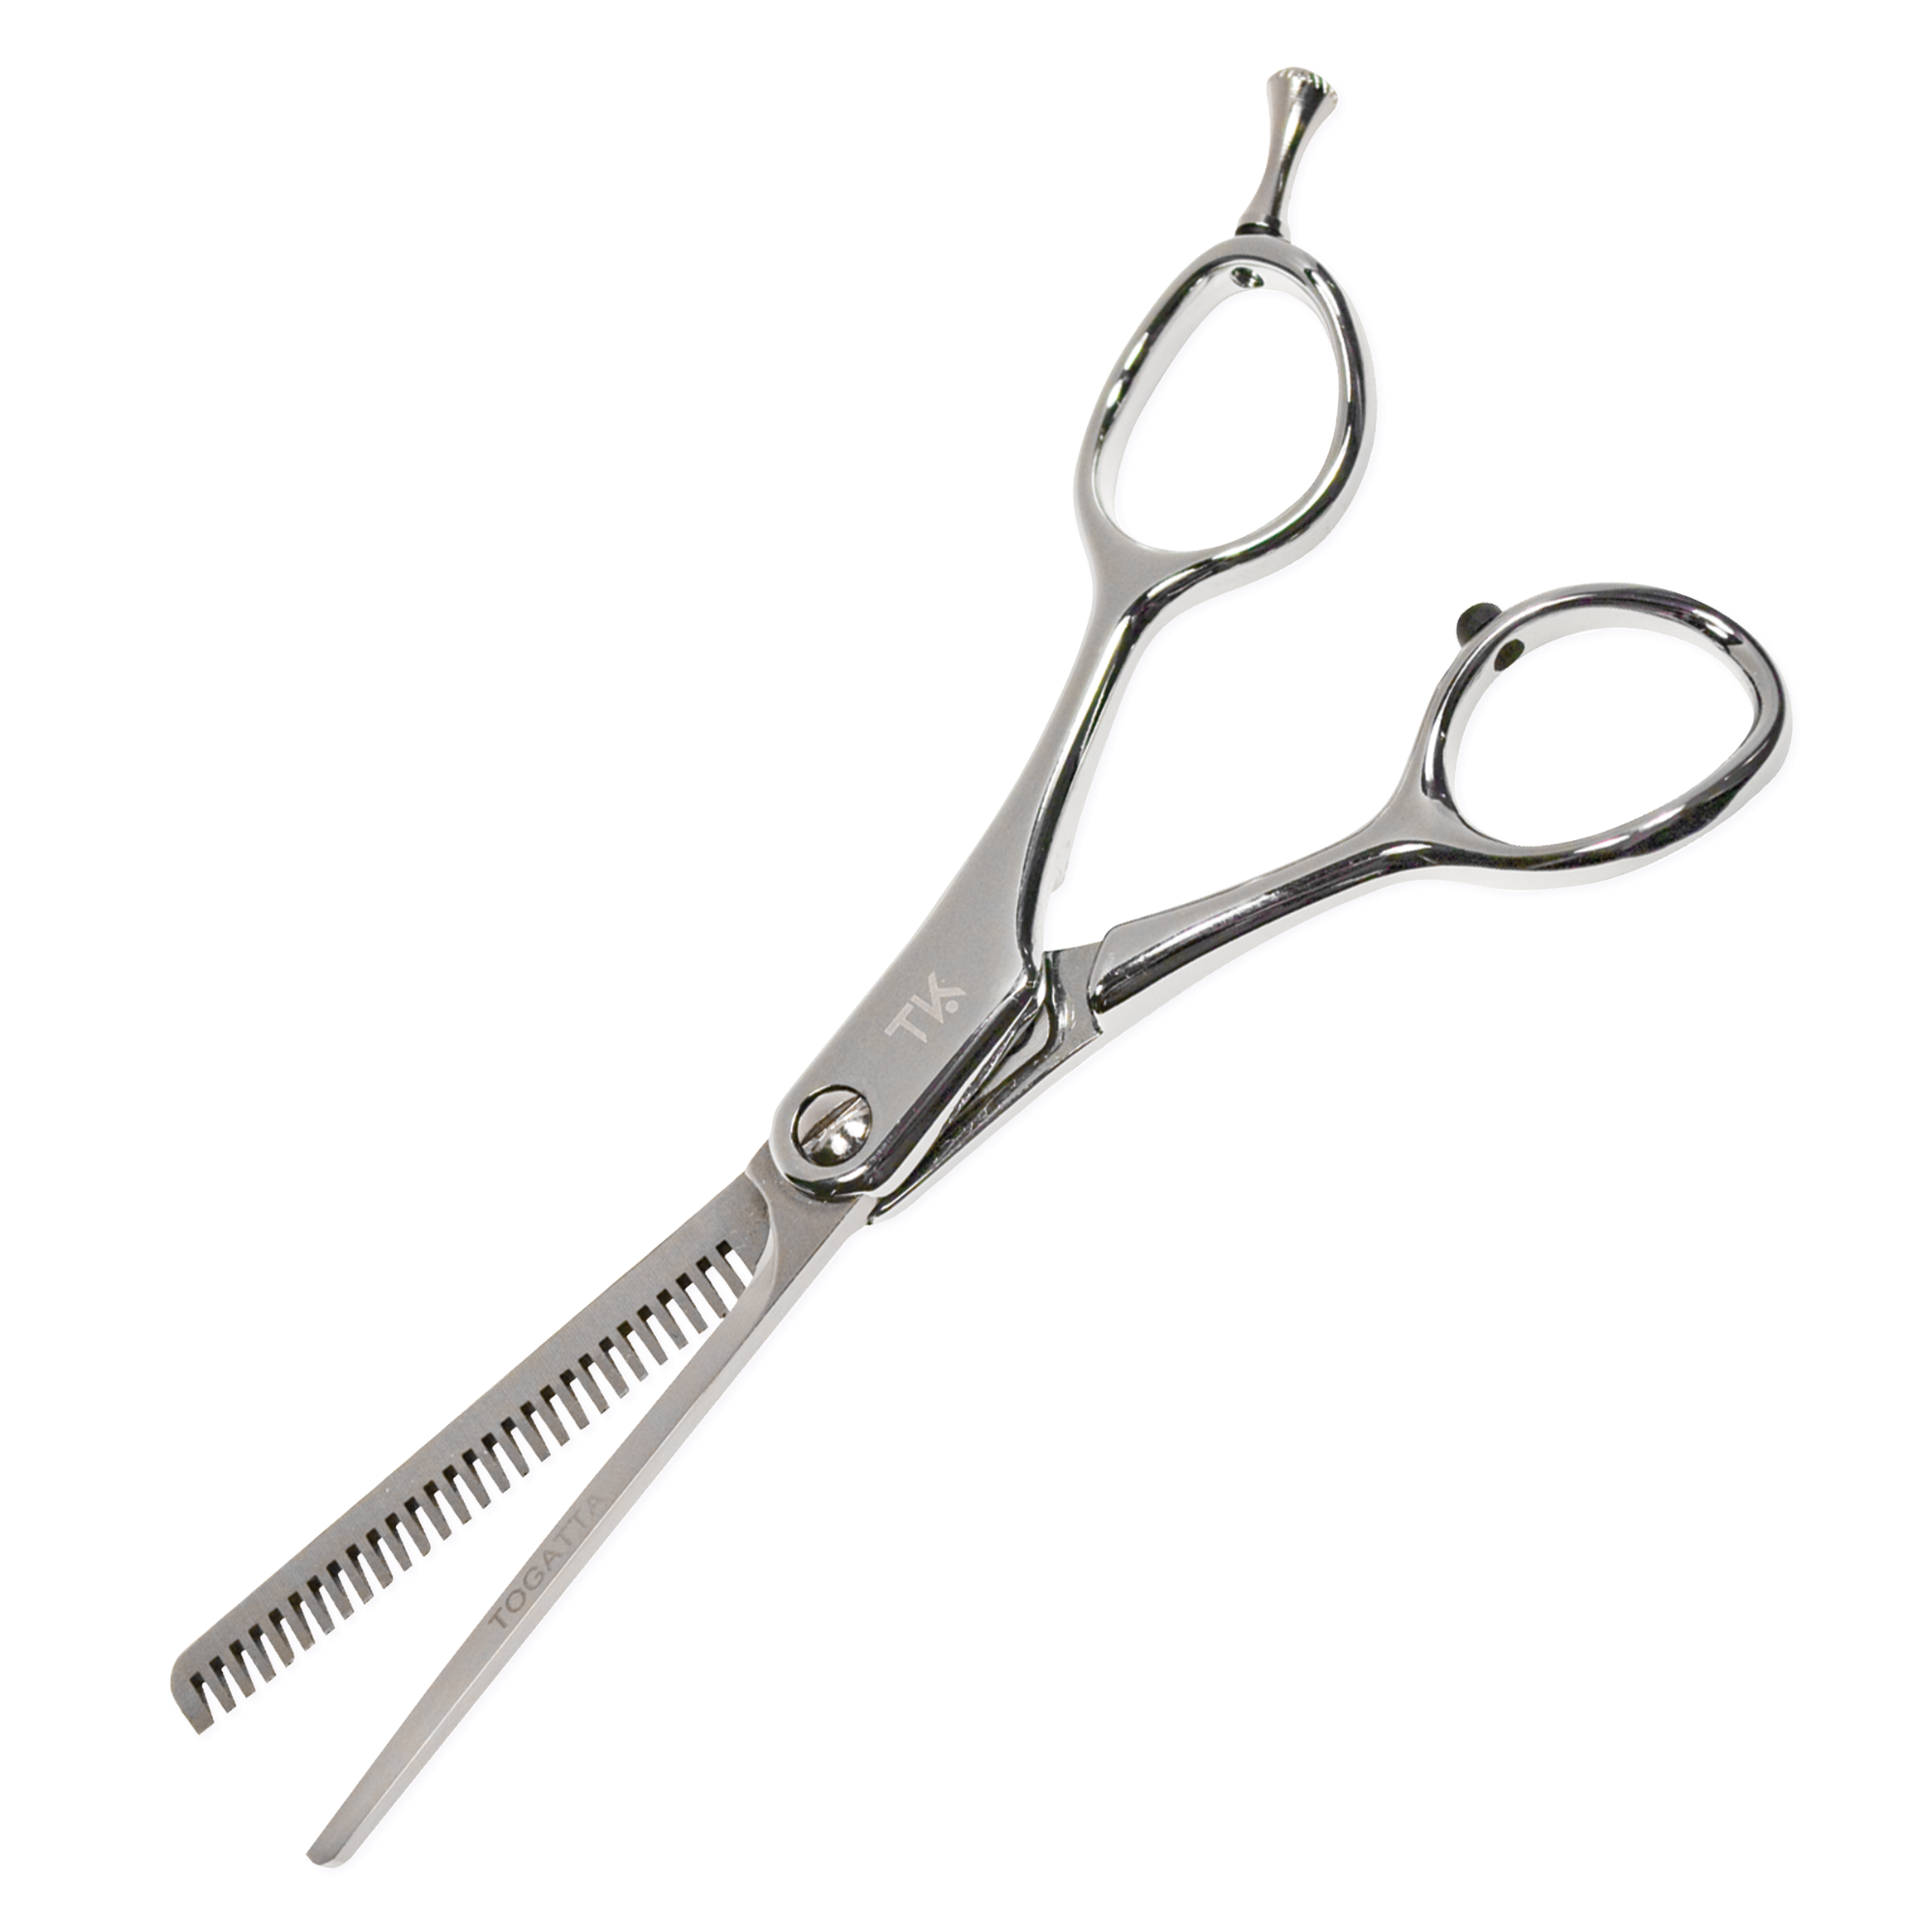 Inspire Japanese Steel, 28-Tooth Thinning Shear